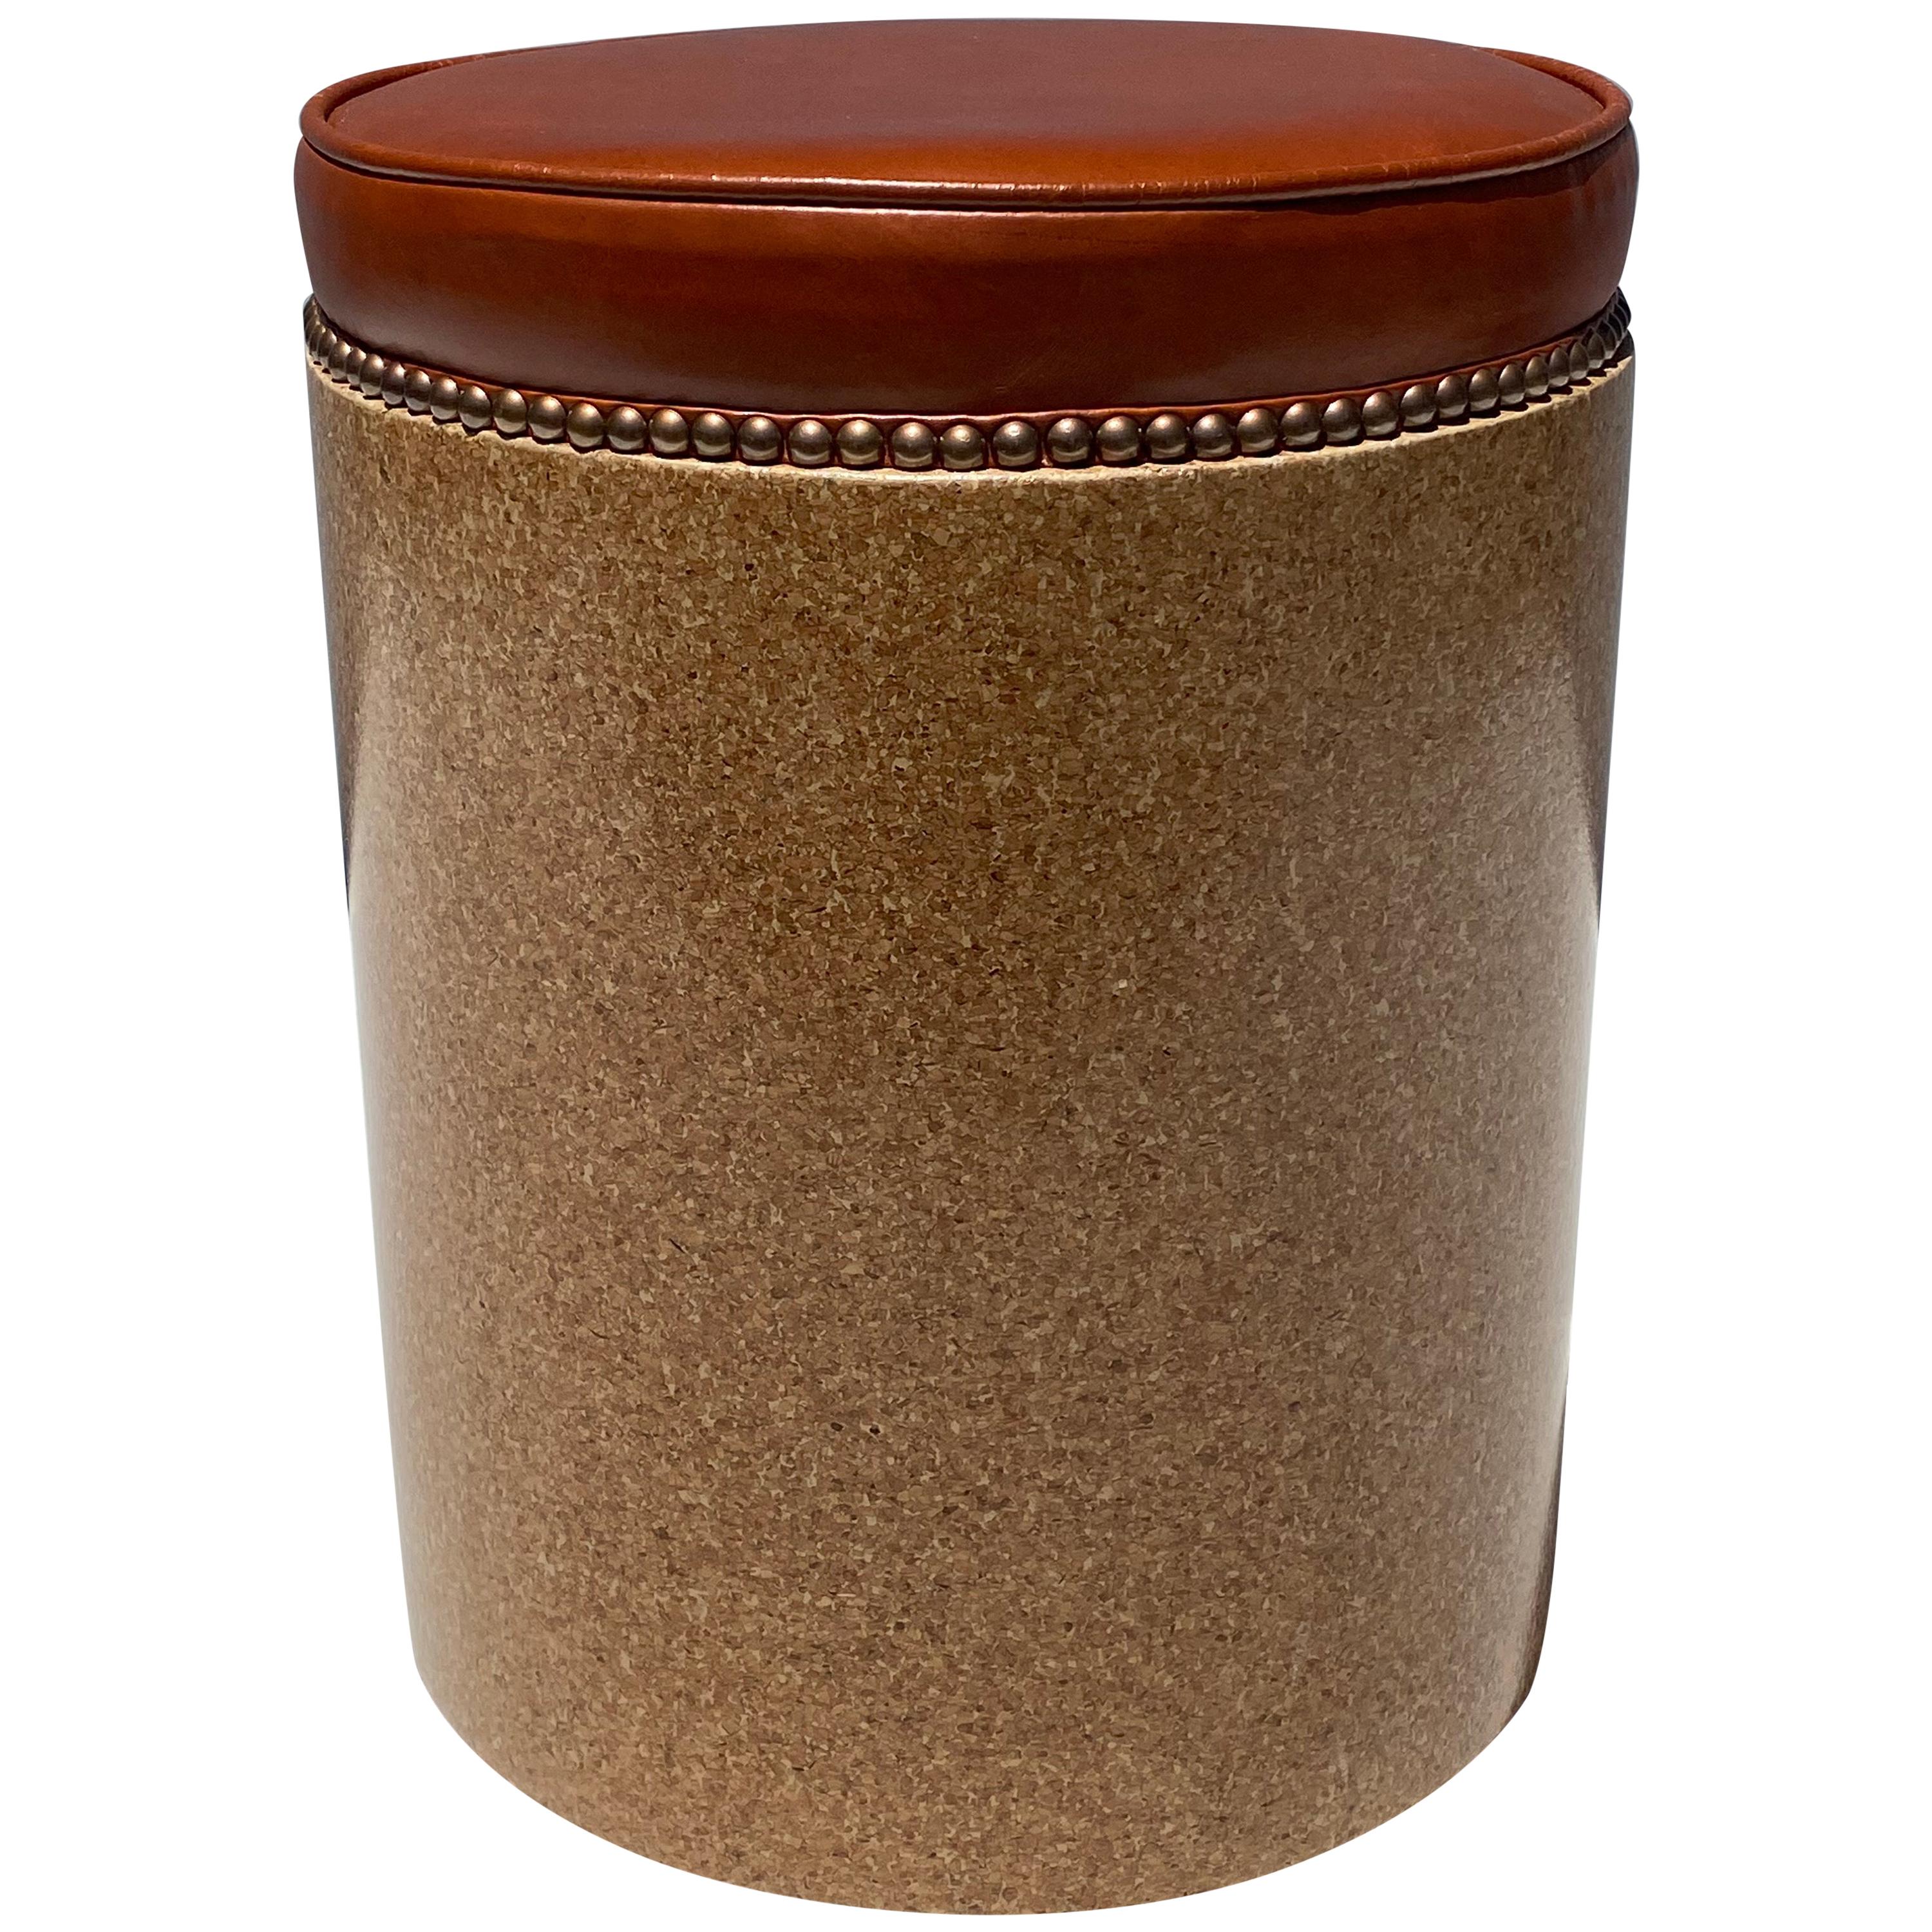 Cork Side Table / Stool in Vintaged Cognac Leather